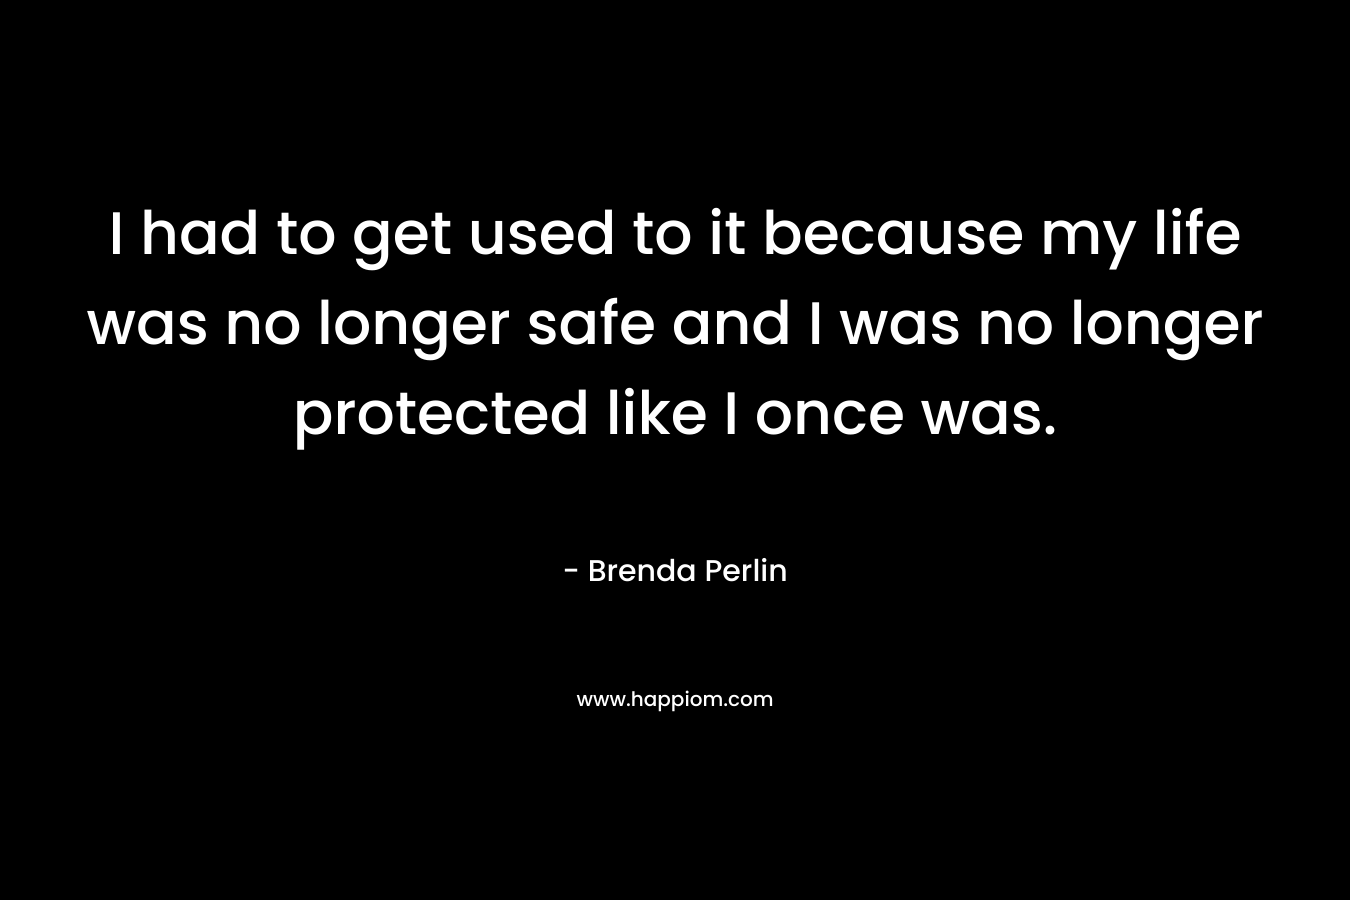 I had to get used to it because my life was no longer safe and I was no longer protected like I once was.